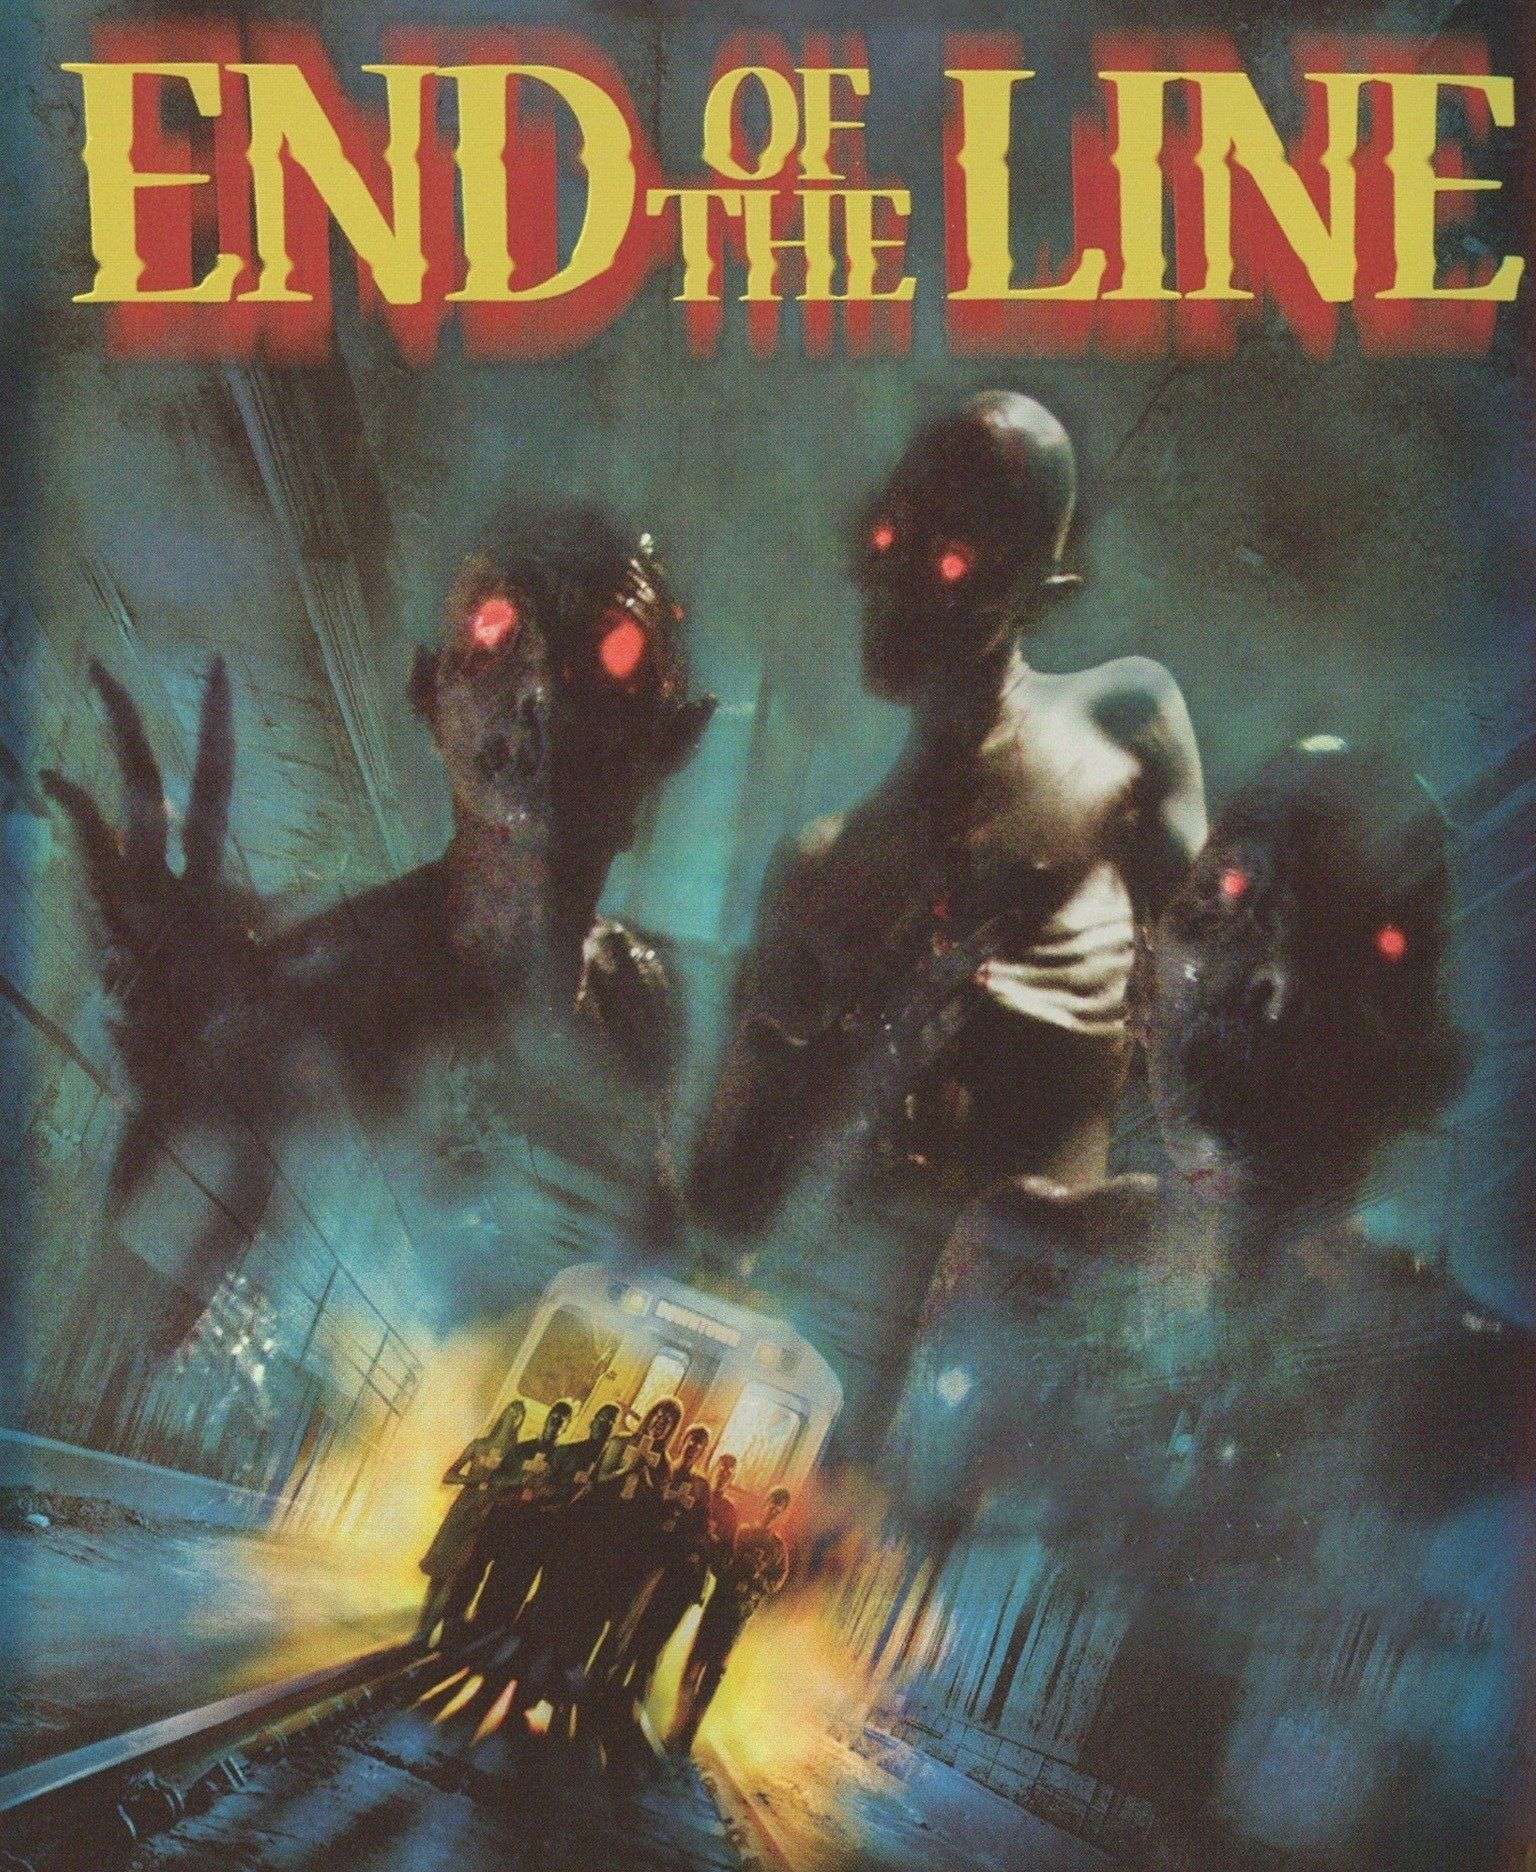 End of the Line (2007)